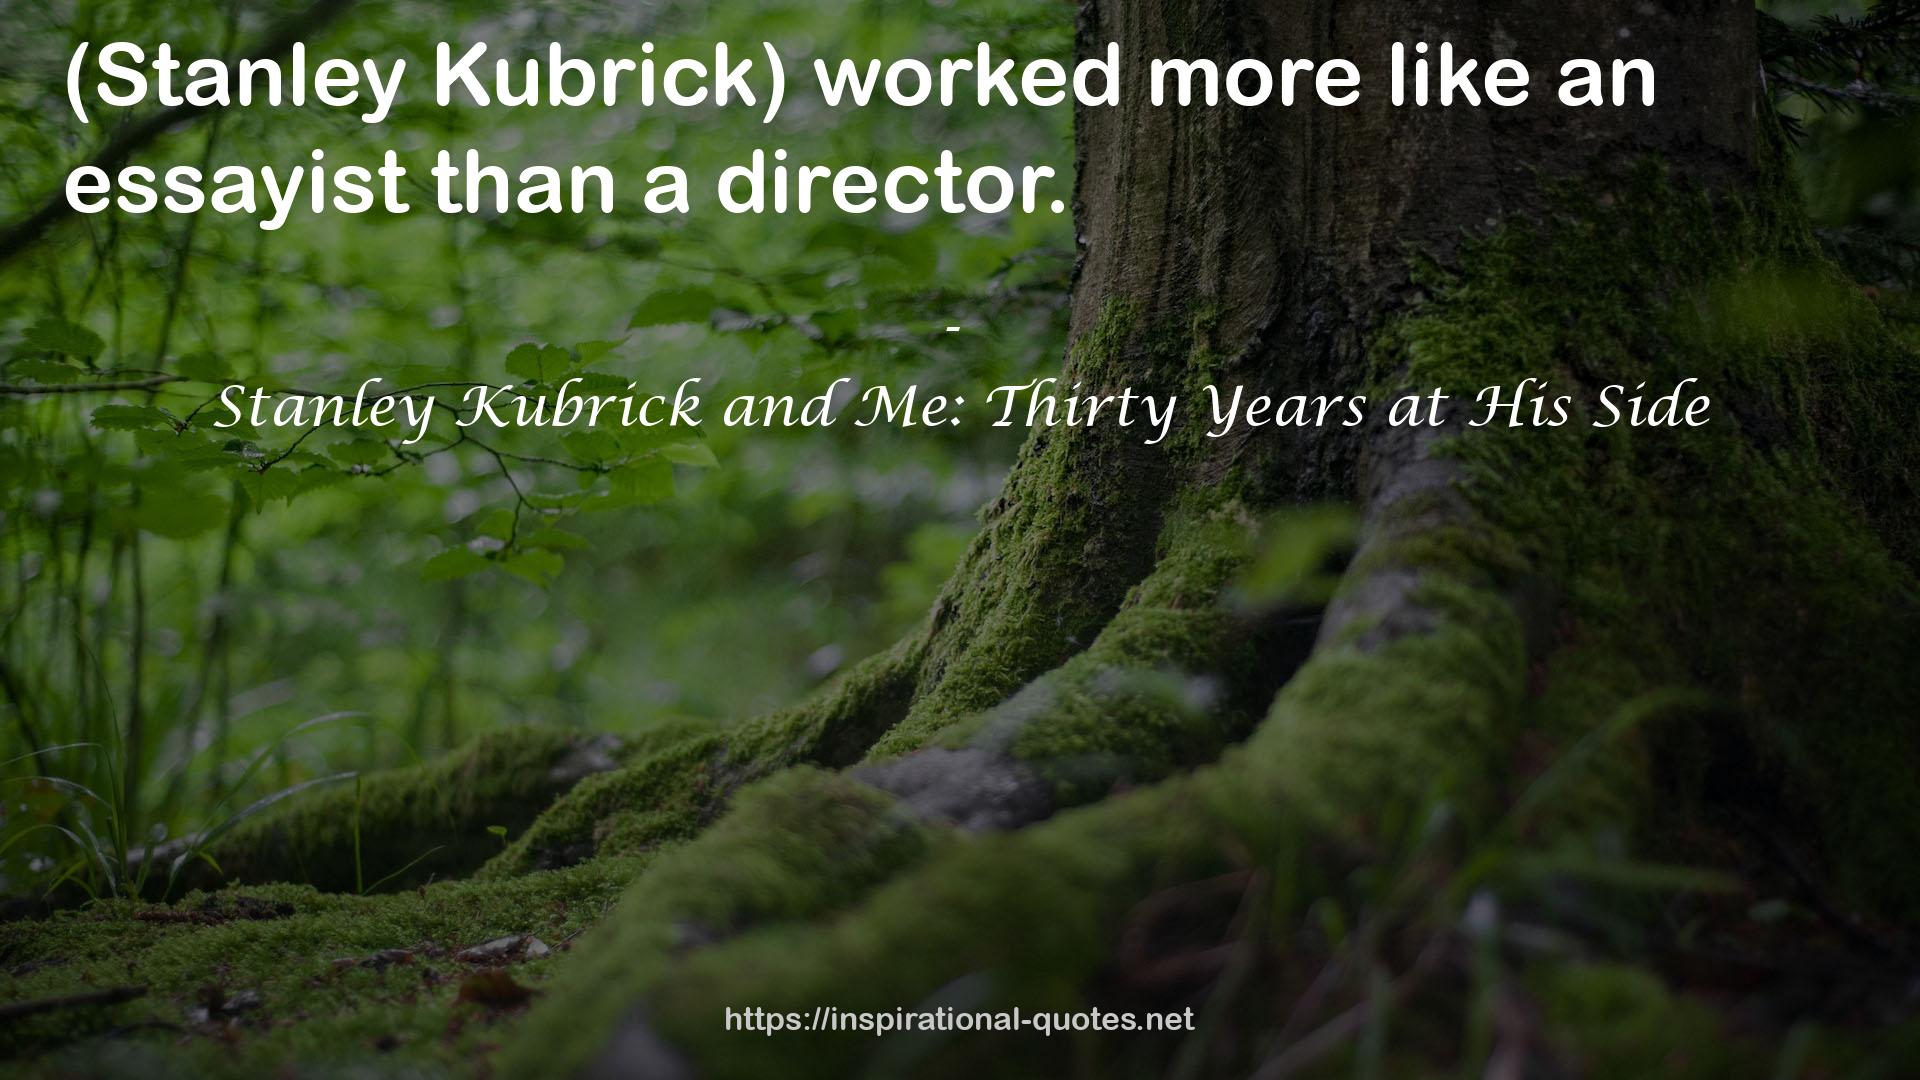 Stanley Kubrick and Me: Thirty Years at His Side QUOTES